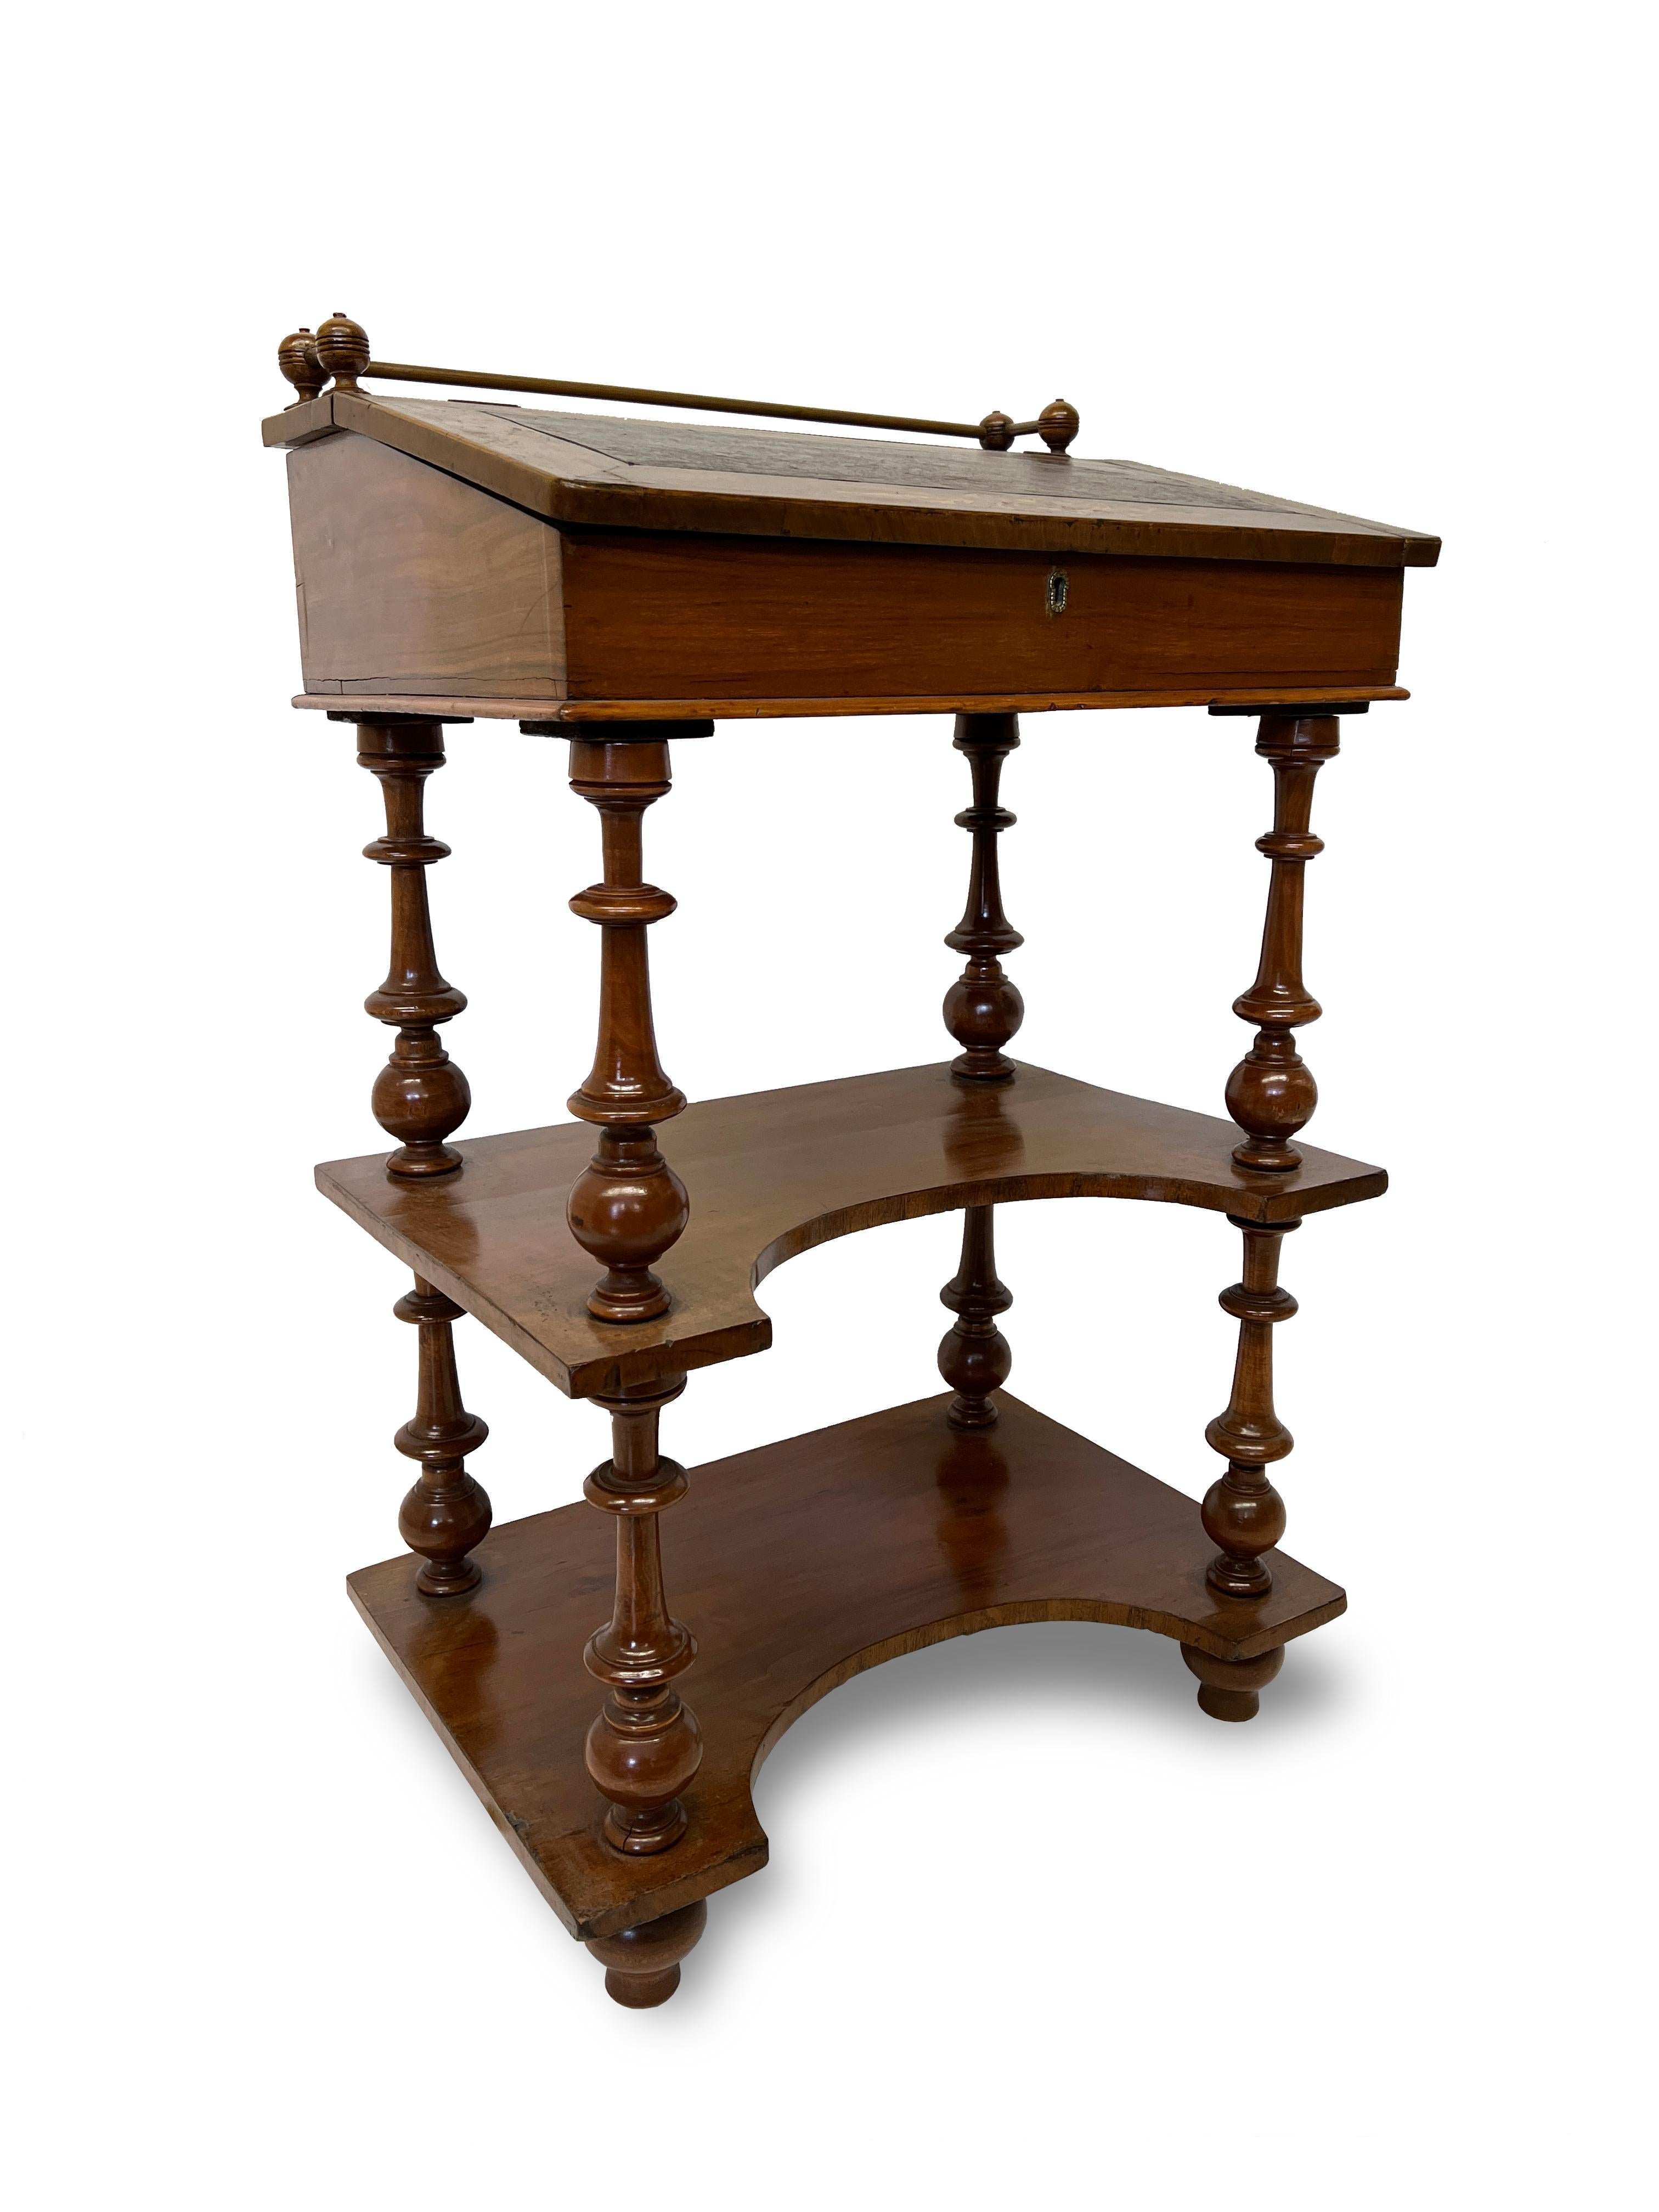 This English inlaid desk or davenport is an excellent addition for any space. It is composed of shelves and has a slant top that lifts to expose a storage compartment. The top has a brass gallery rail with wooden baluster supports. The slant front